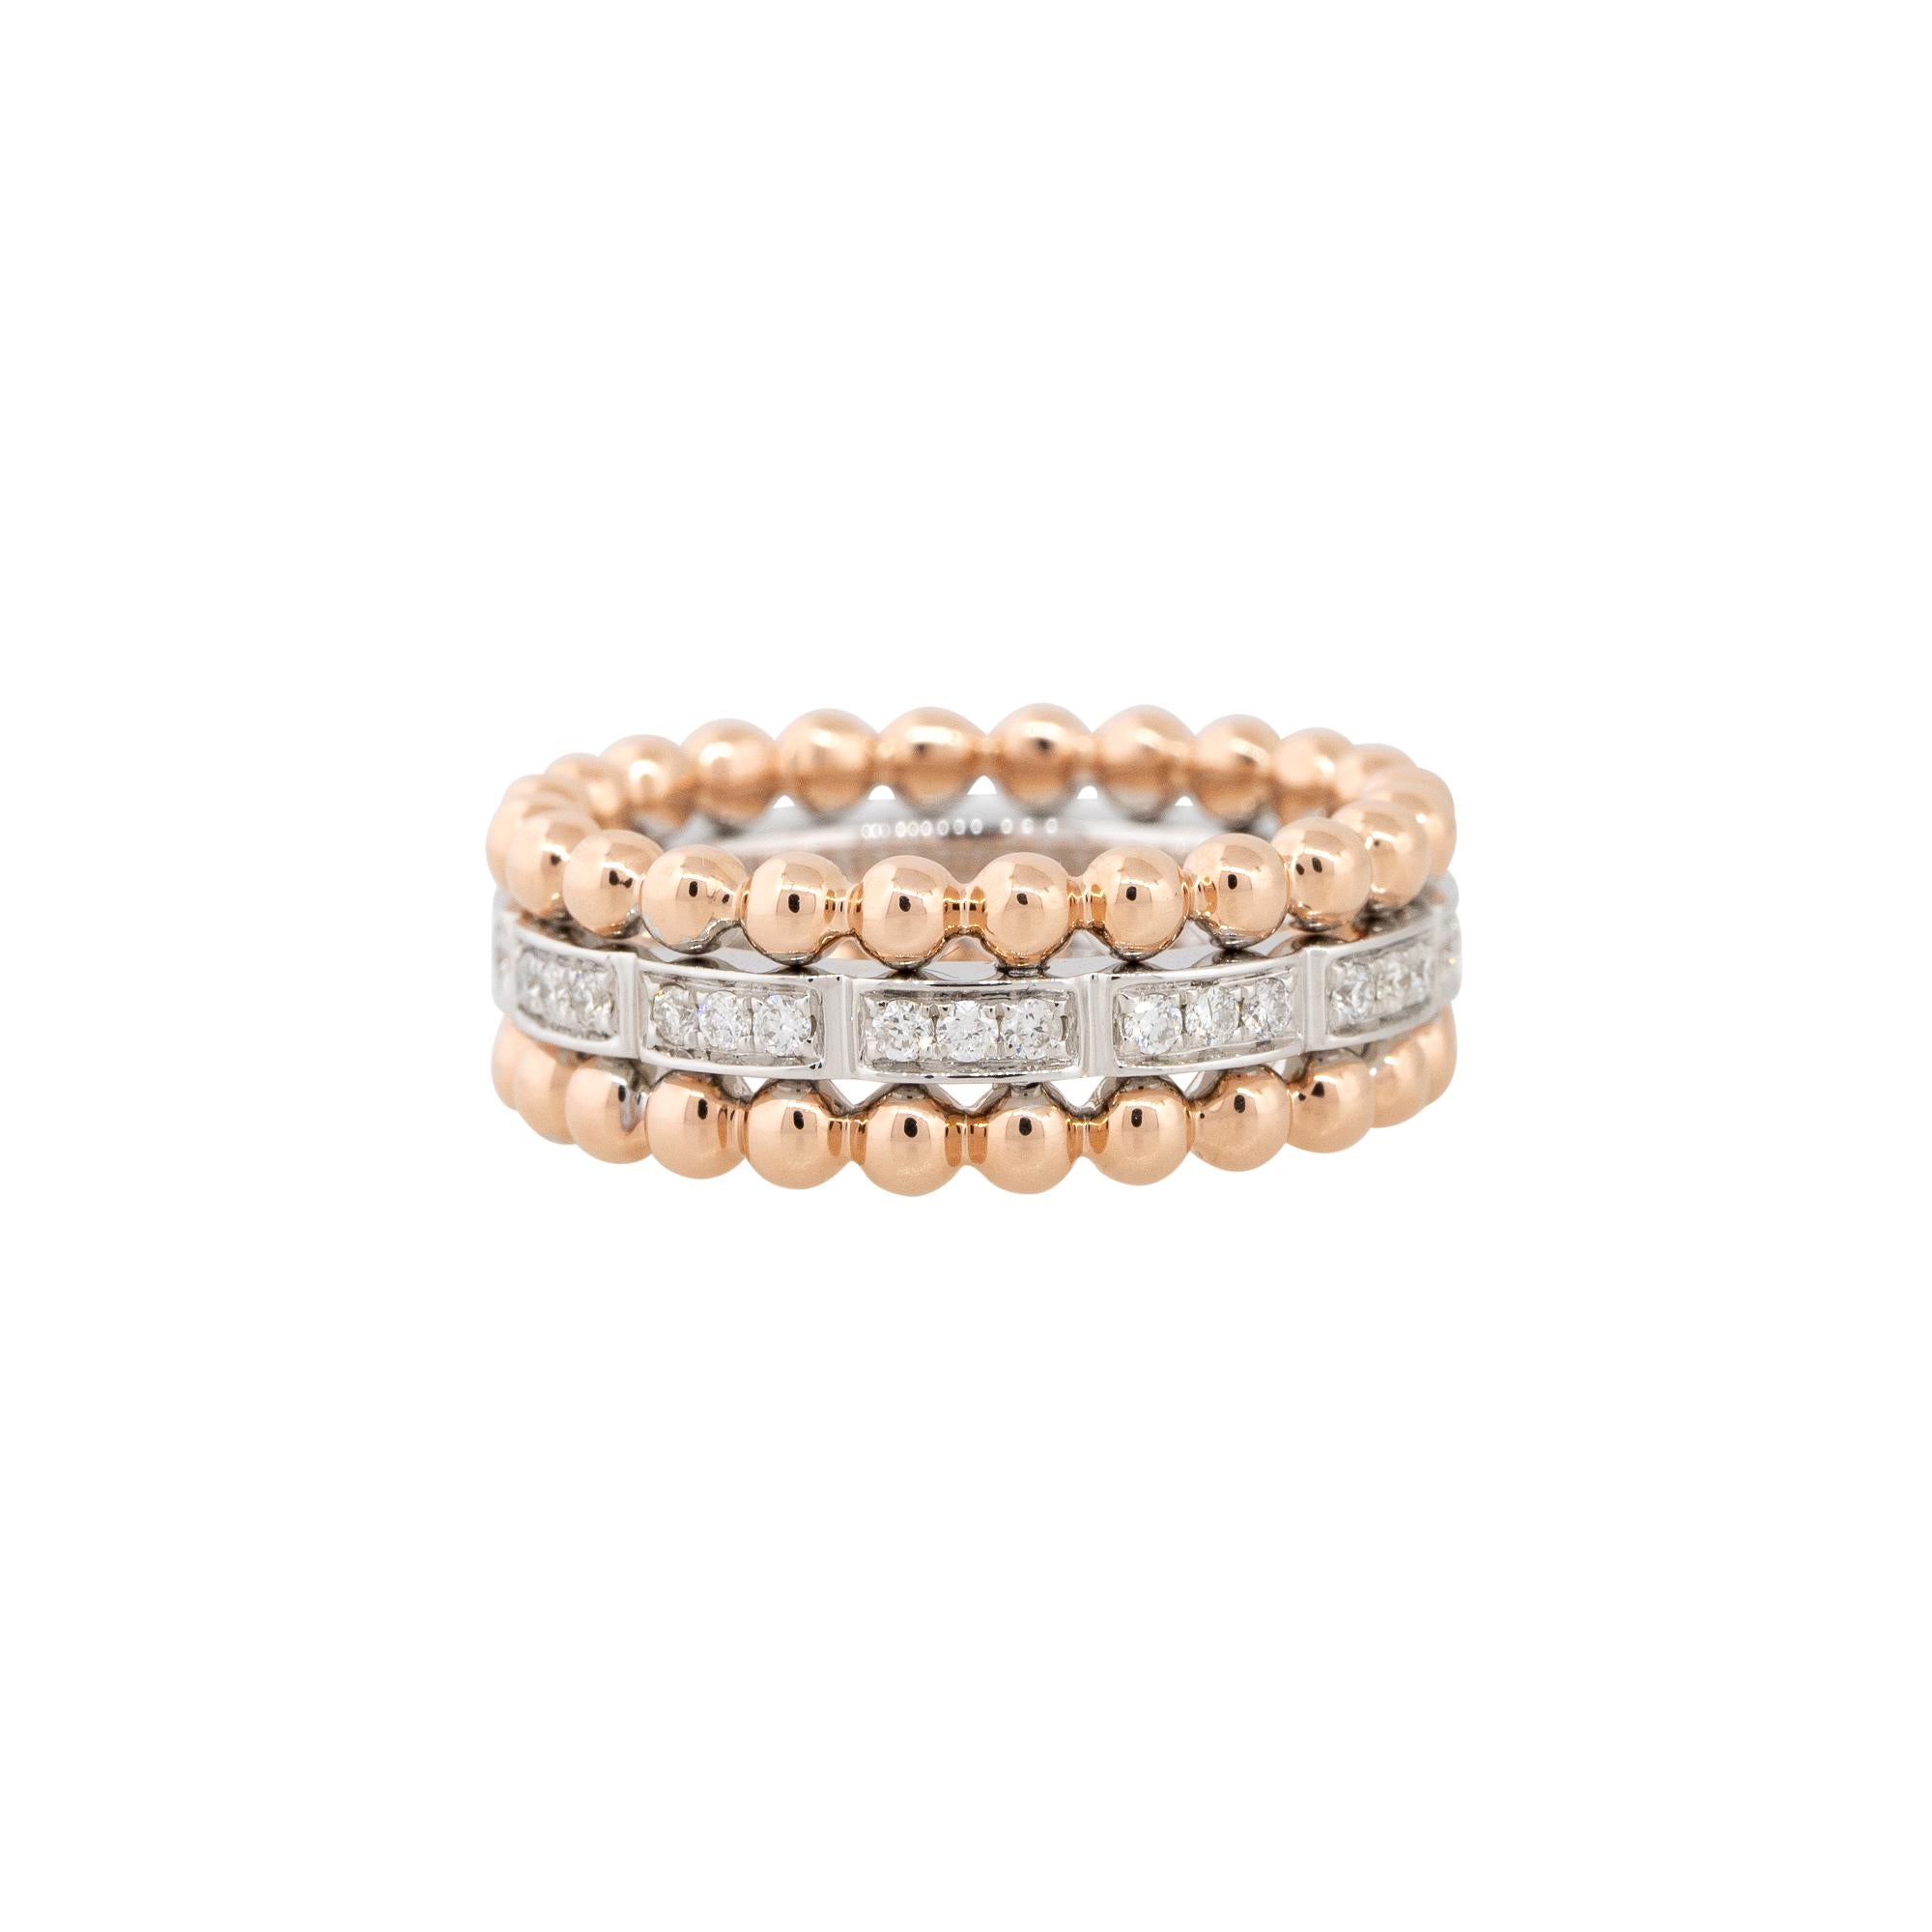 18k White and Rose Gold 0.37ctw Diamond 3 Row Bump Band
Style: Women's Diamond 3 Row Band
Material: 18k White Gold and 18k Rose Gold
Main Diamond Details: Approximately 0.37ctw of Round Brilliant cut Diamonds
Ring Size: 6.25 (Cannot be sized)
Item